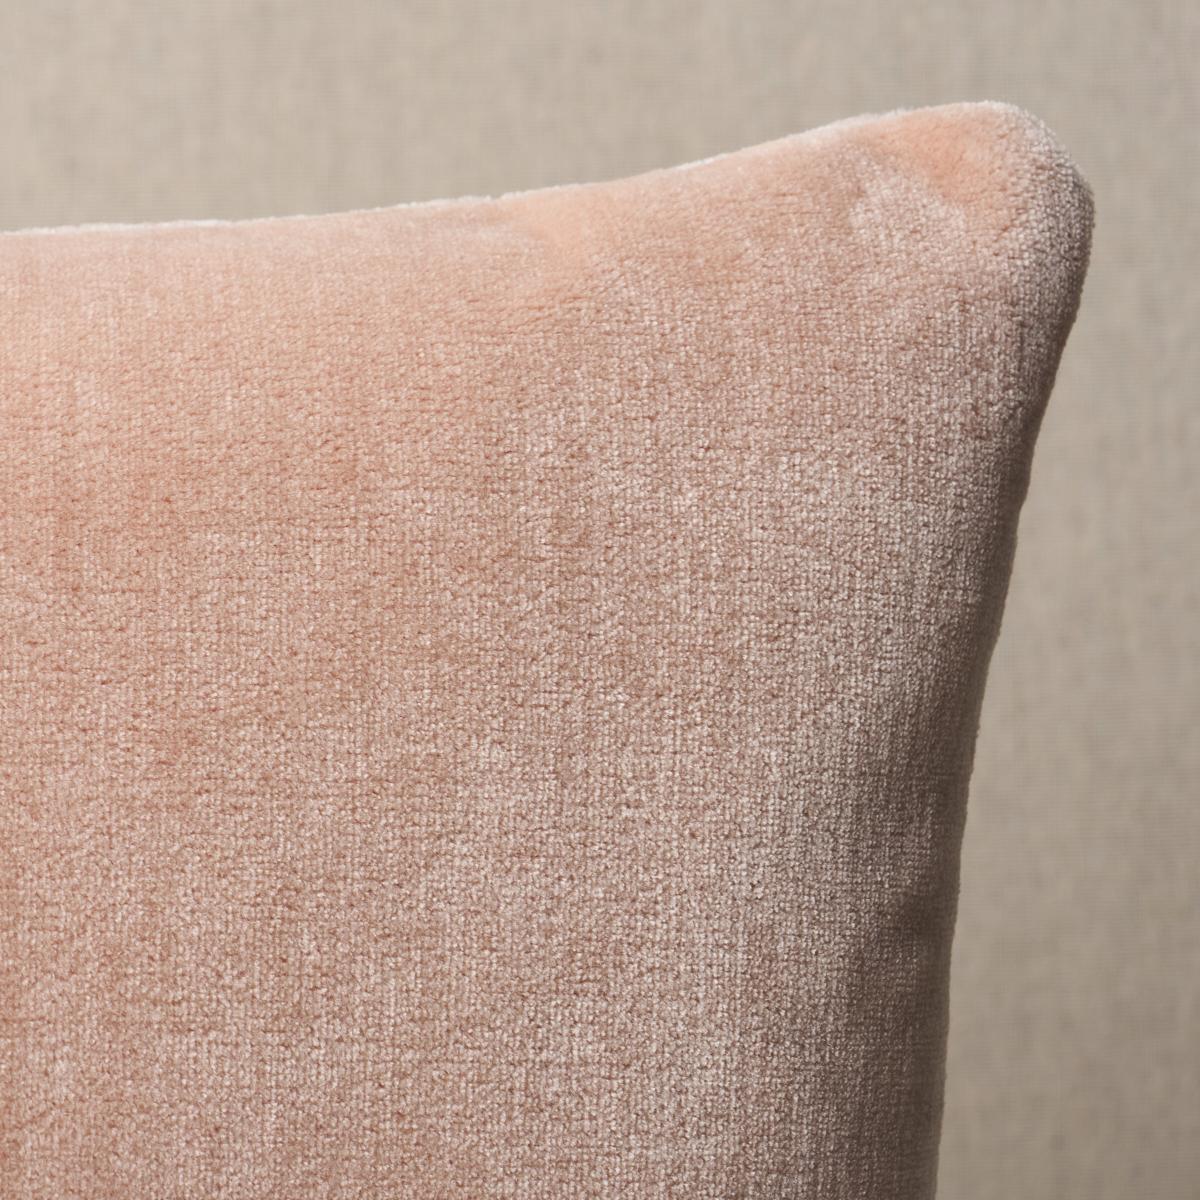 This pillow features Venetian Silk Velvet with a knife edge finish. The ultimate in sumptuous luxury, our gorgeous silk velvet has an unbelievably lush hand and a wonderful luster. Pillow includes a feather/down fill insert and hidden zipper closure.